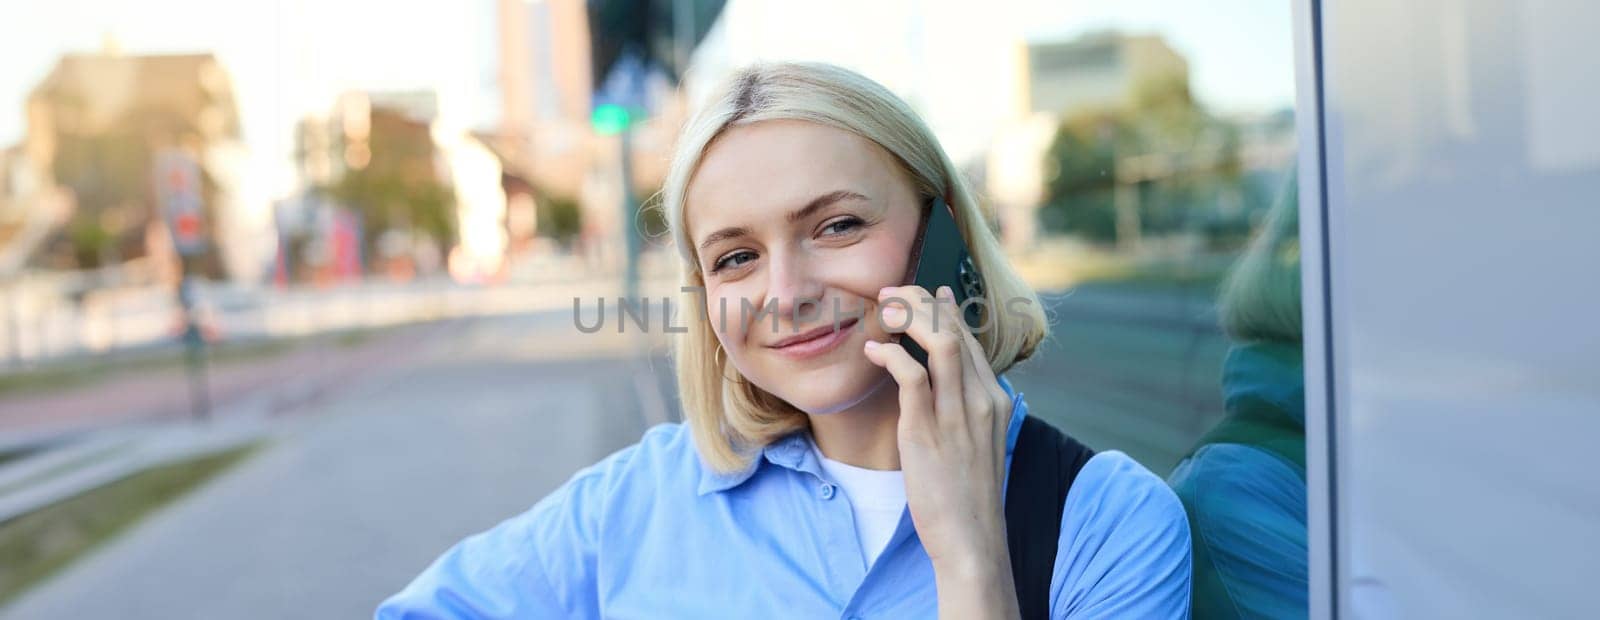 Close up portrait of smiling blond woman, chatting on the phone, talking on mobile telephone, standing on street outdoors.